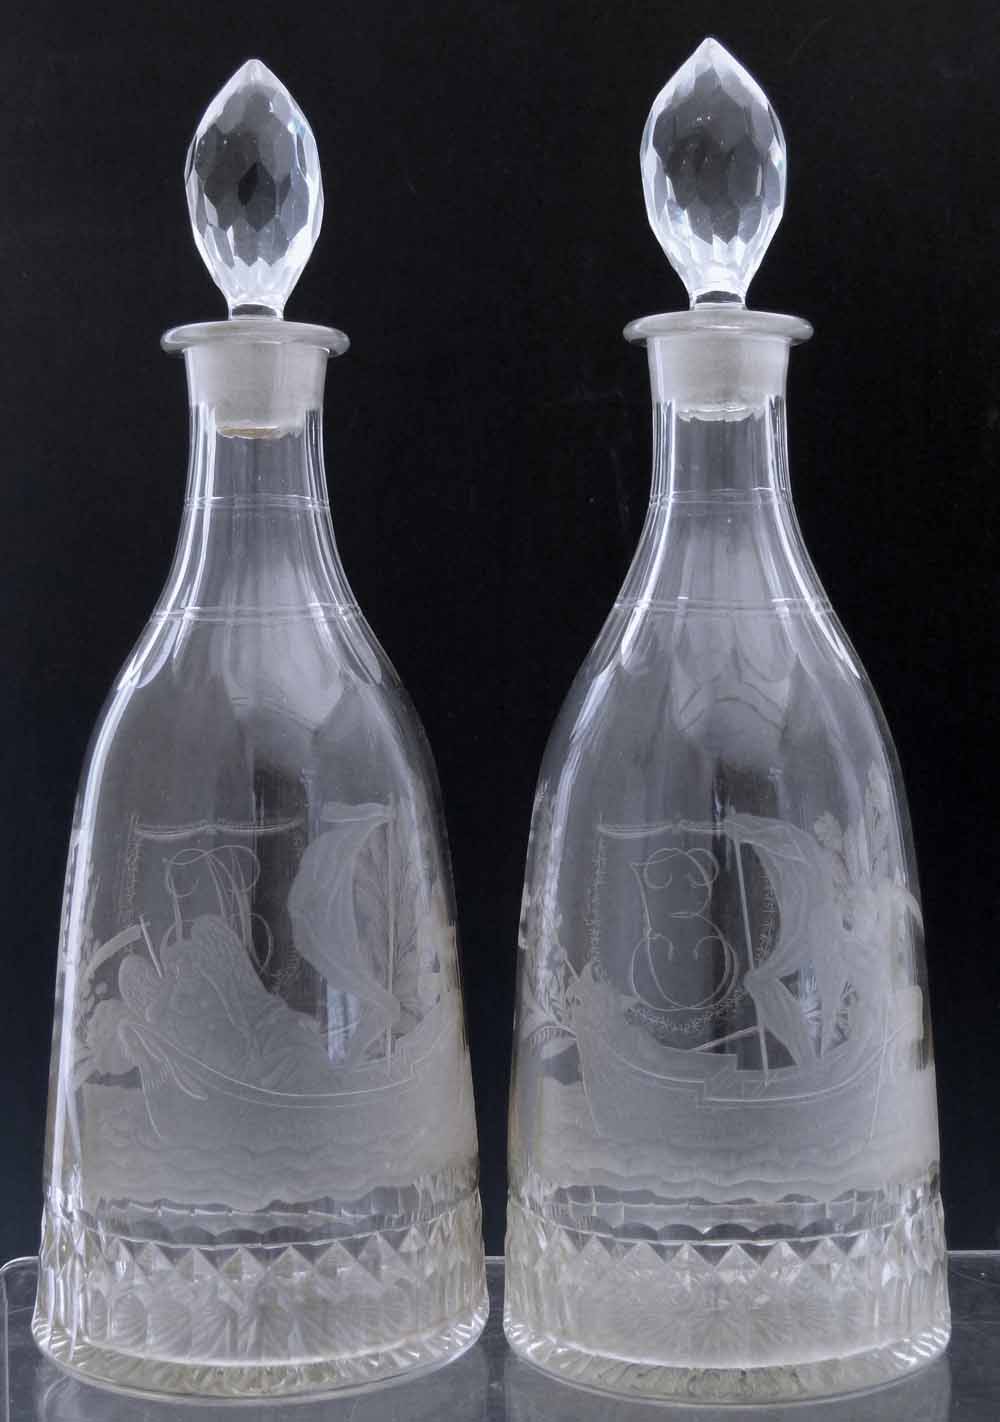 Pair of mallet shaped decanters, early 19th century, engraved with classical  allegorical scenes - Image 2 of 8